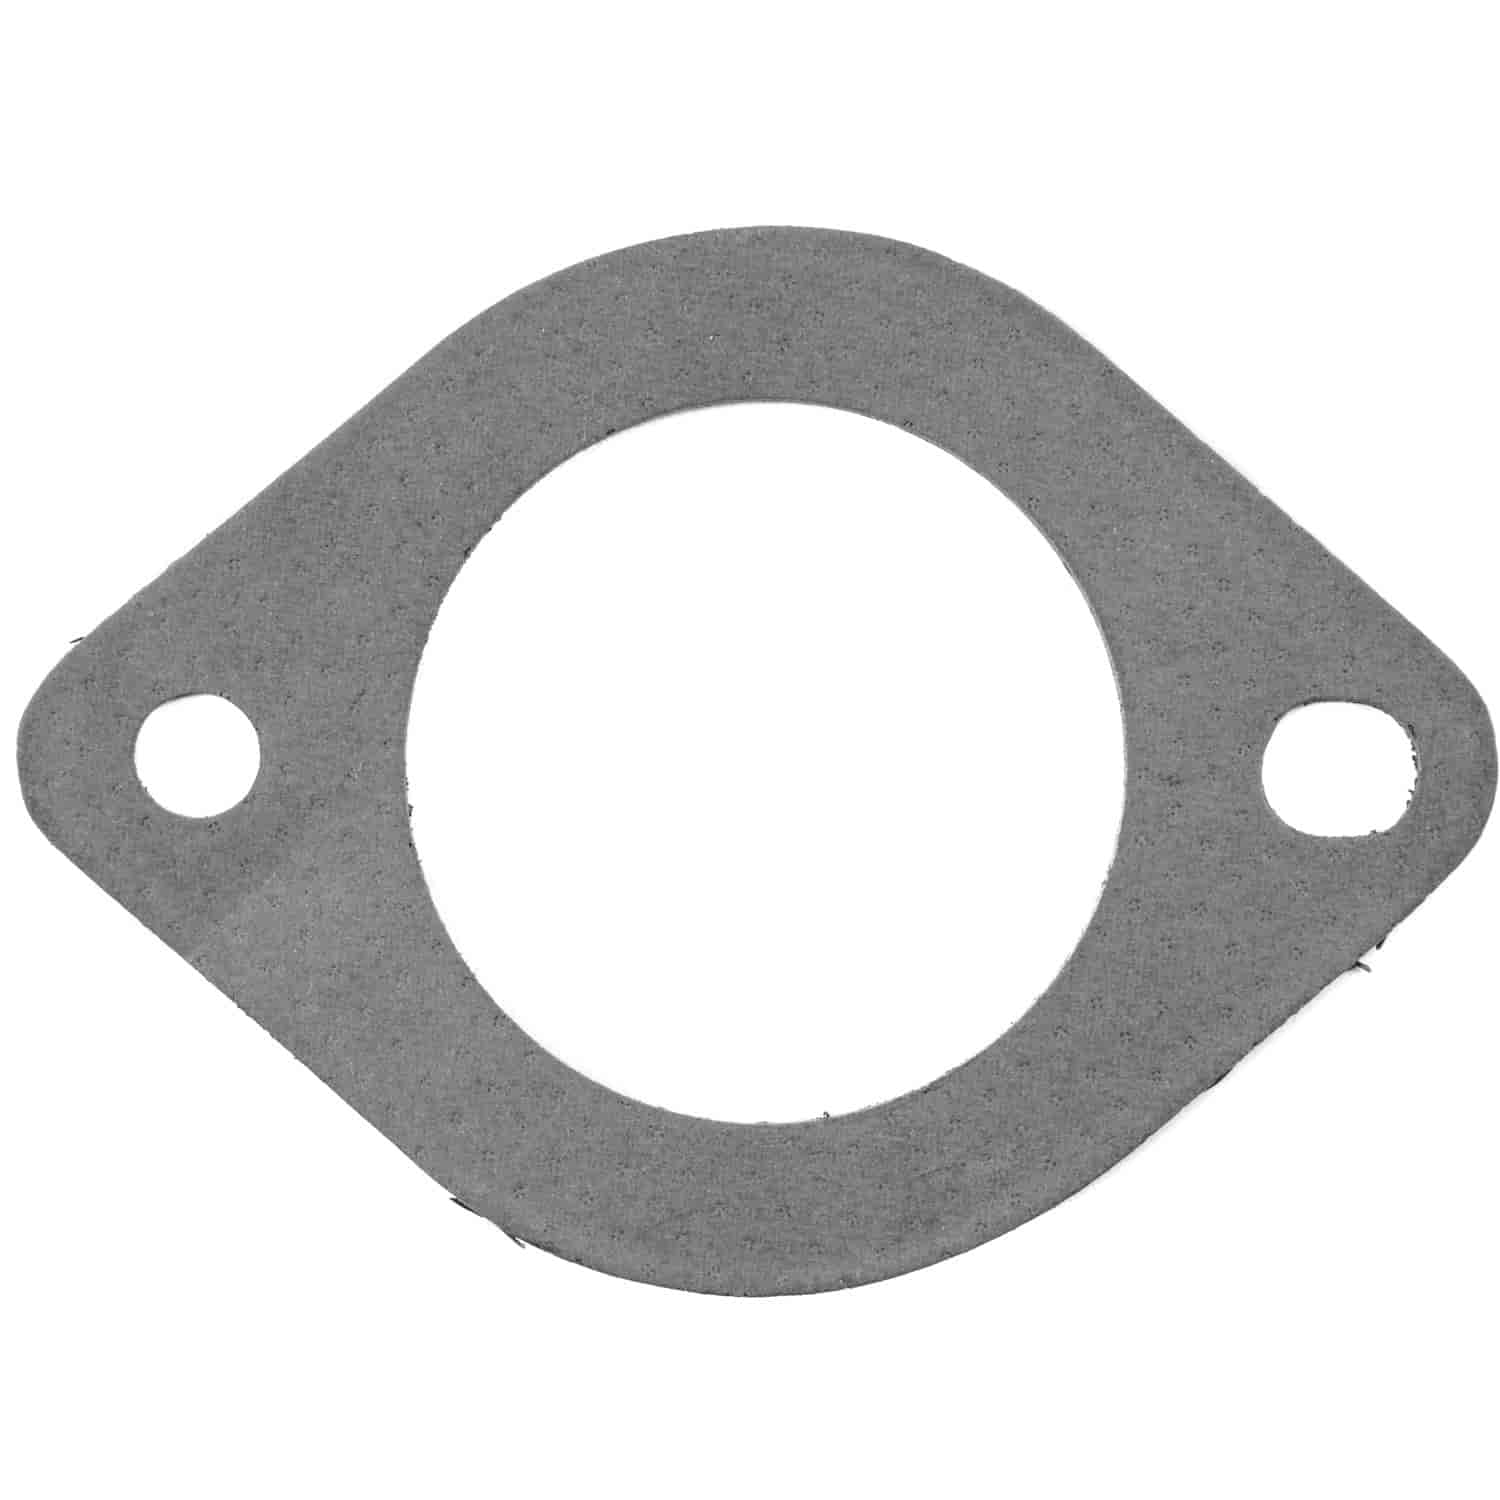 Exhaust Flange Gasket 1989-2007 for Nissan